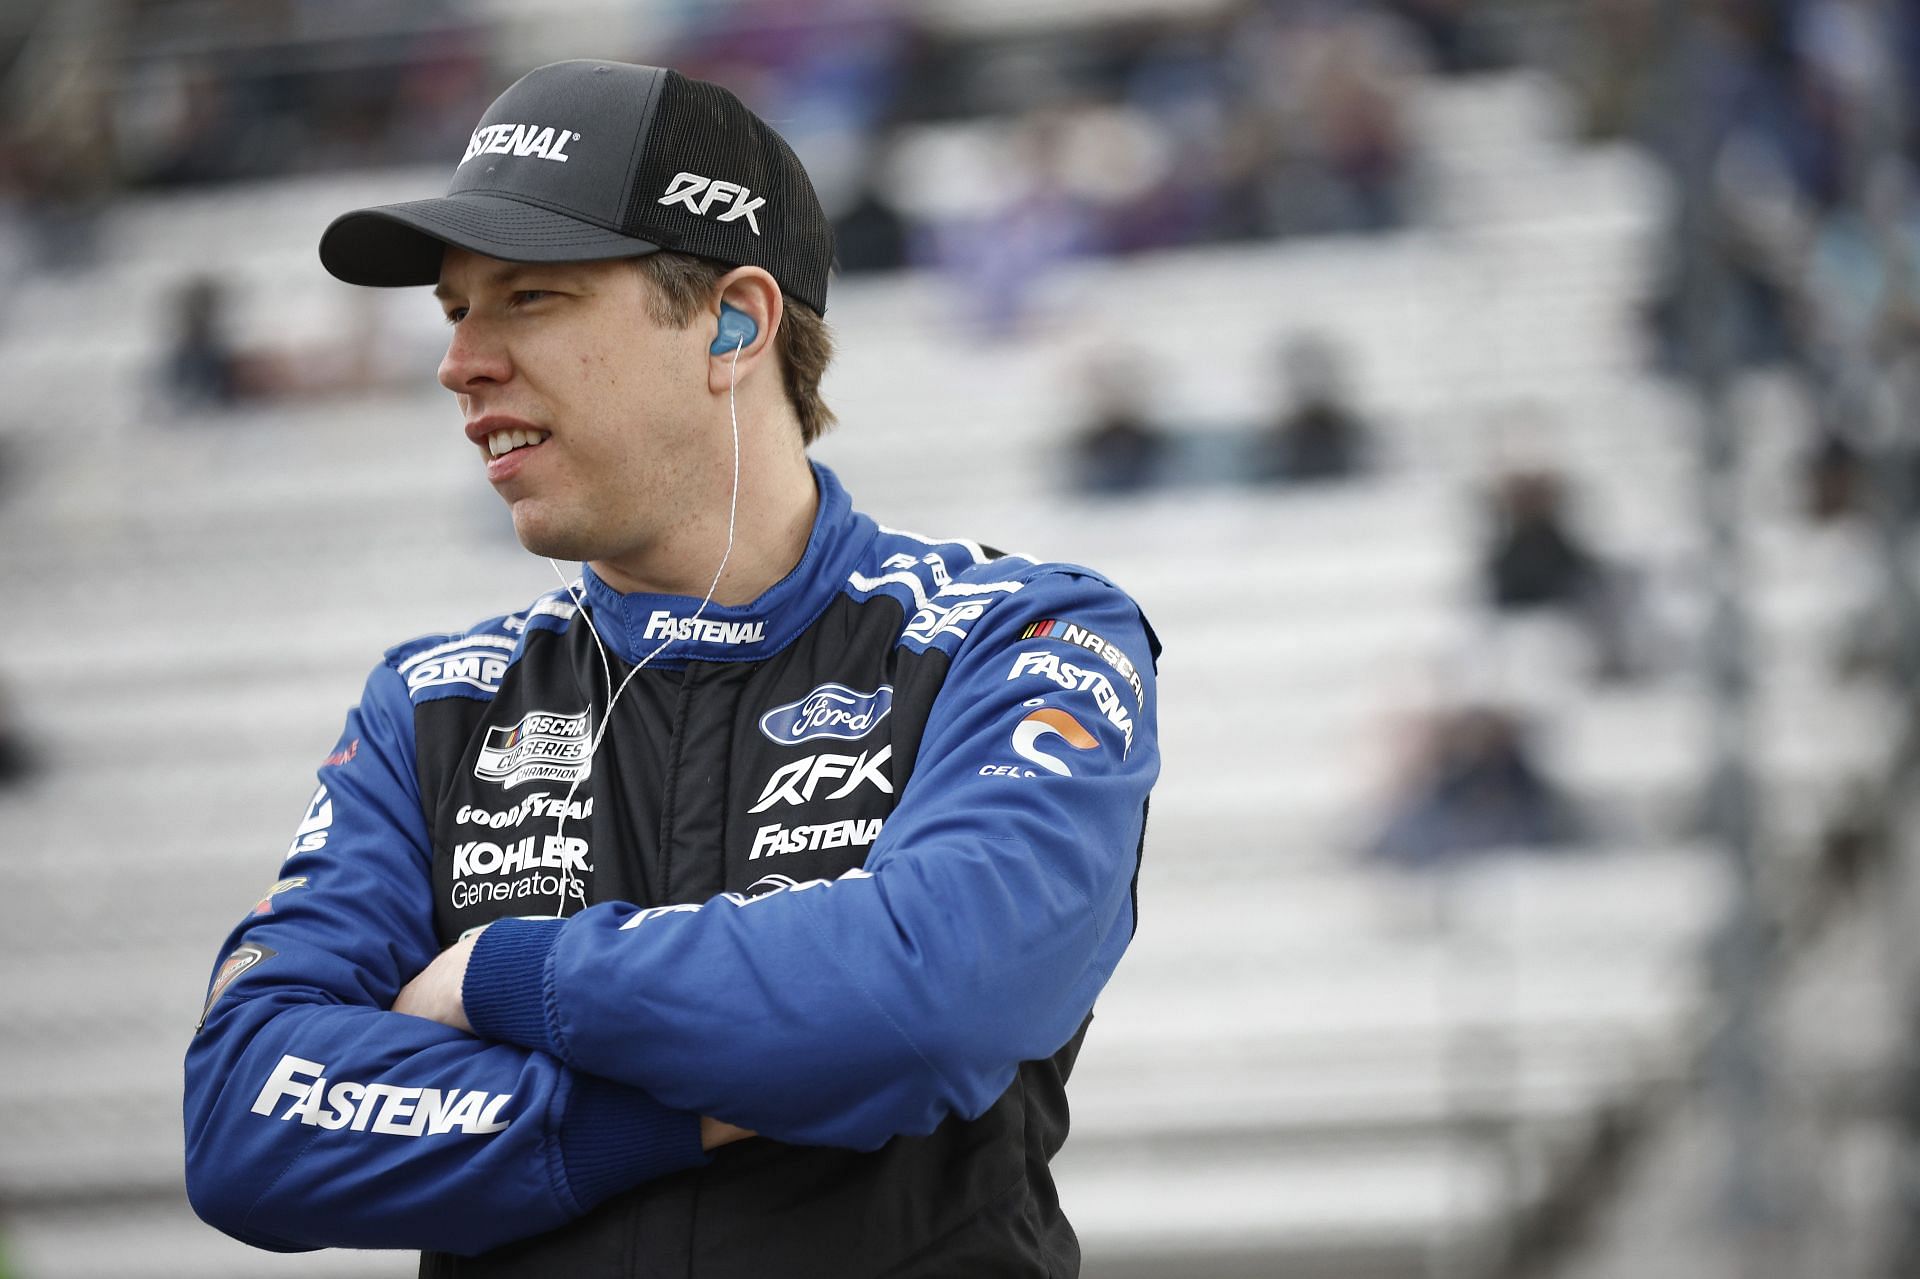 Brad Keselowski looks on during qualifying for the NASCAR Cup Series Blue-Emu Maximum Pain Relief 400 at Martinsville Speedway.